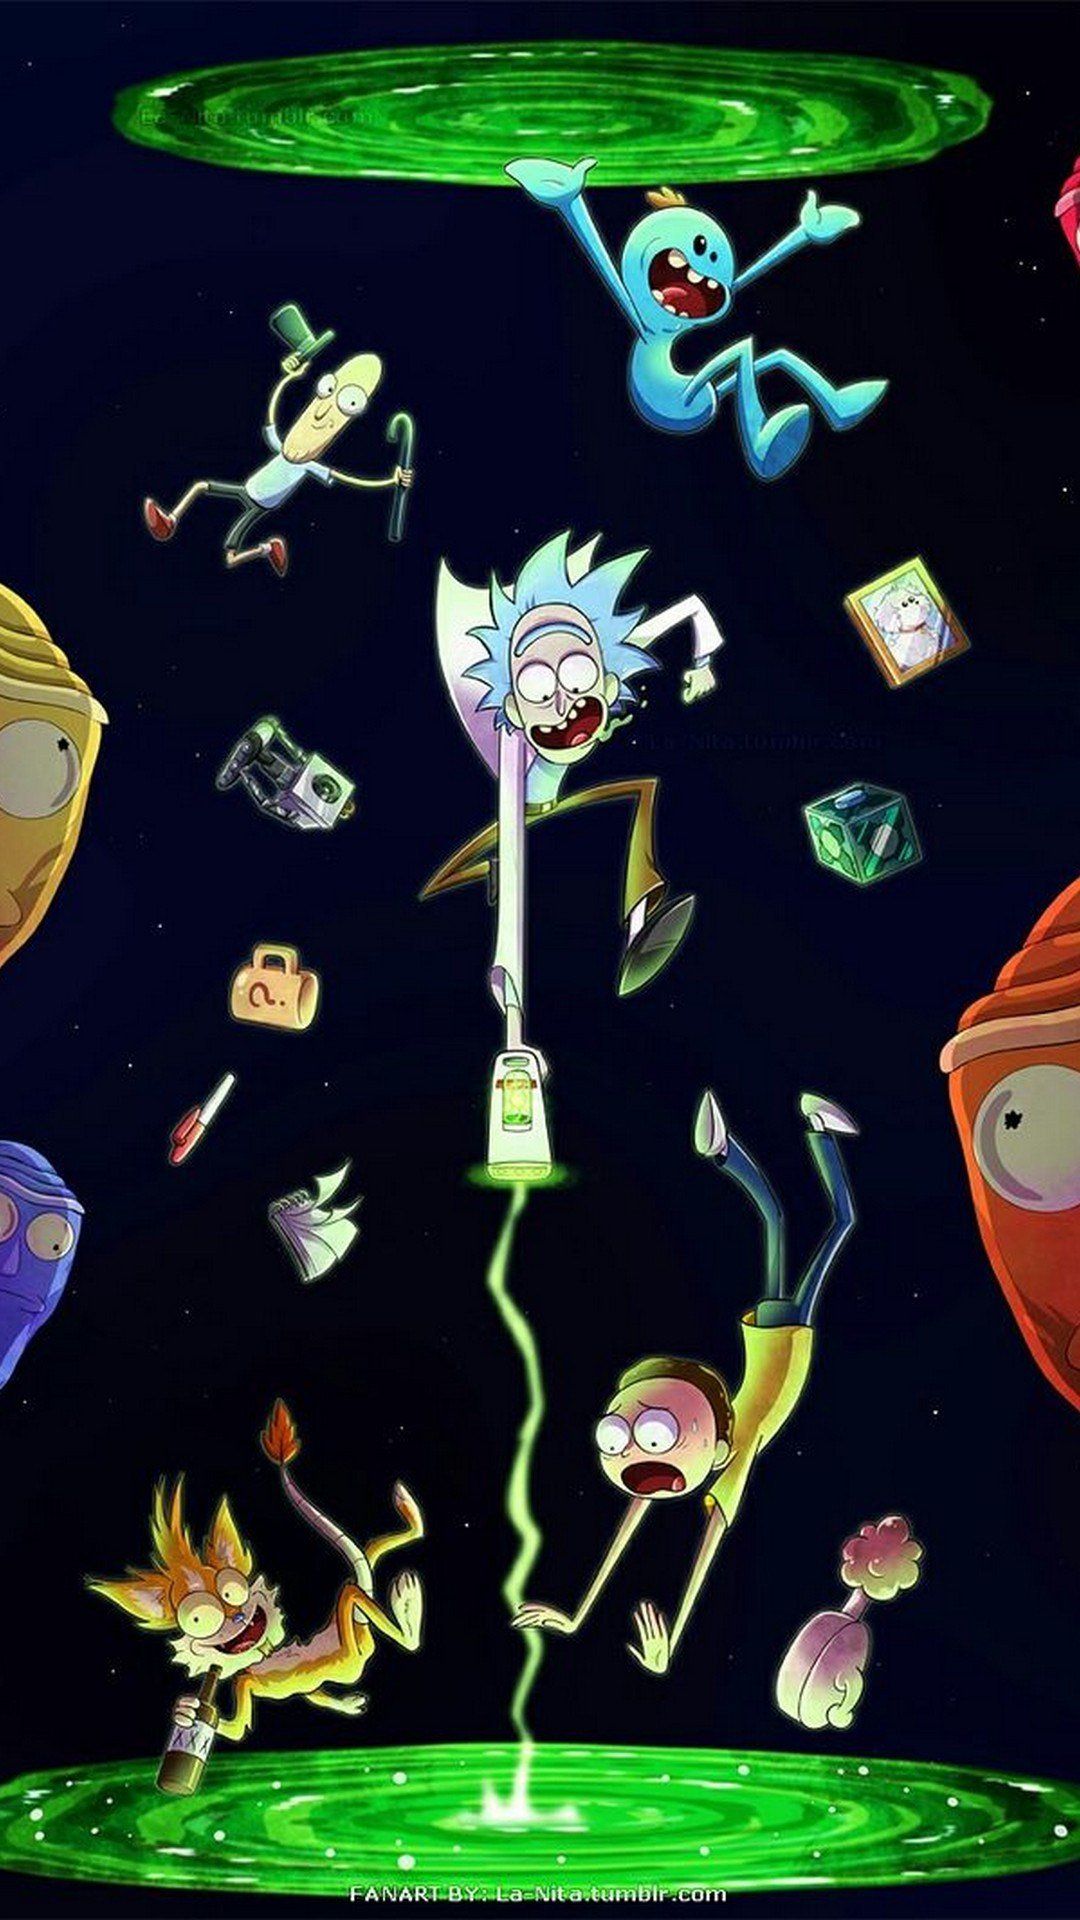 Live Wallpapers Iphone Rick And Morty